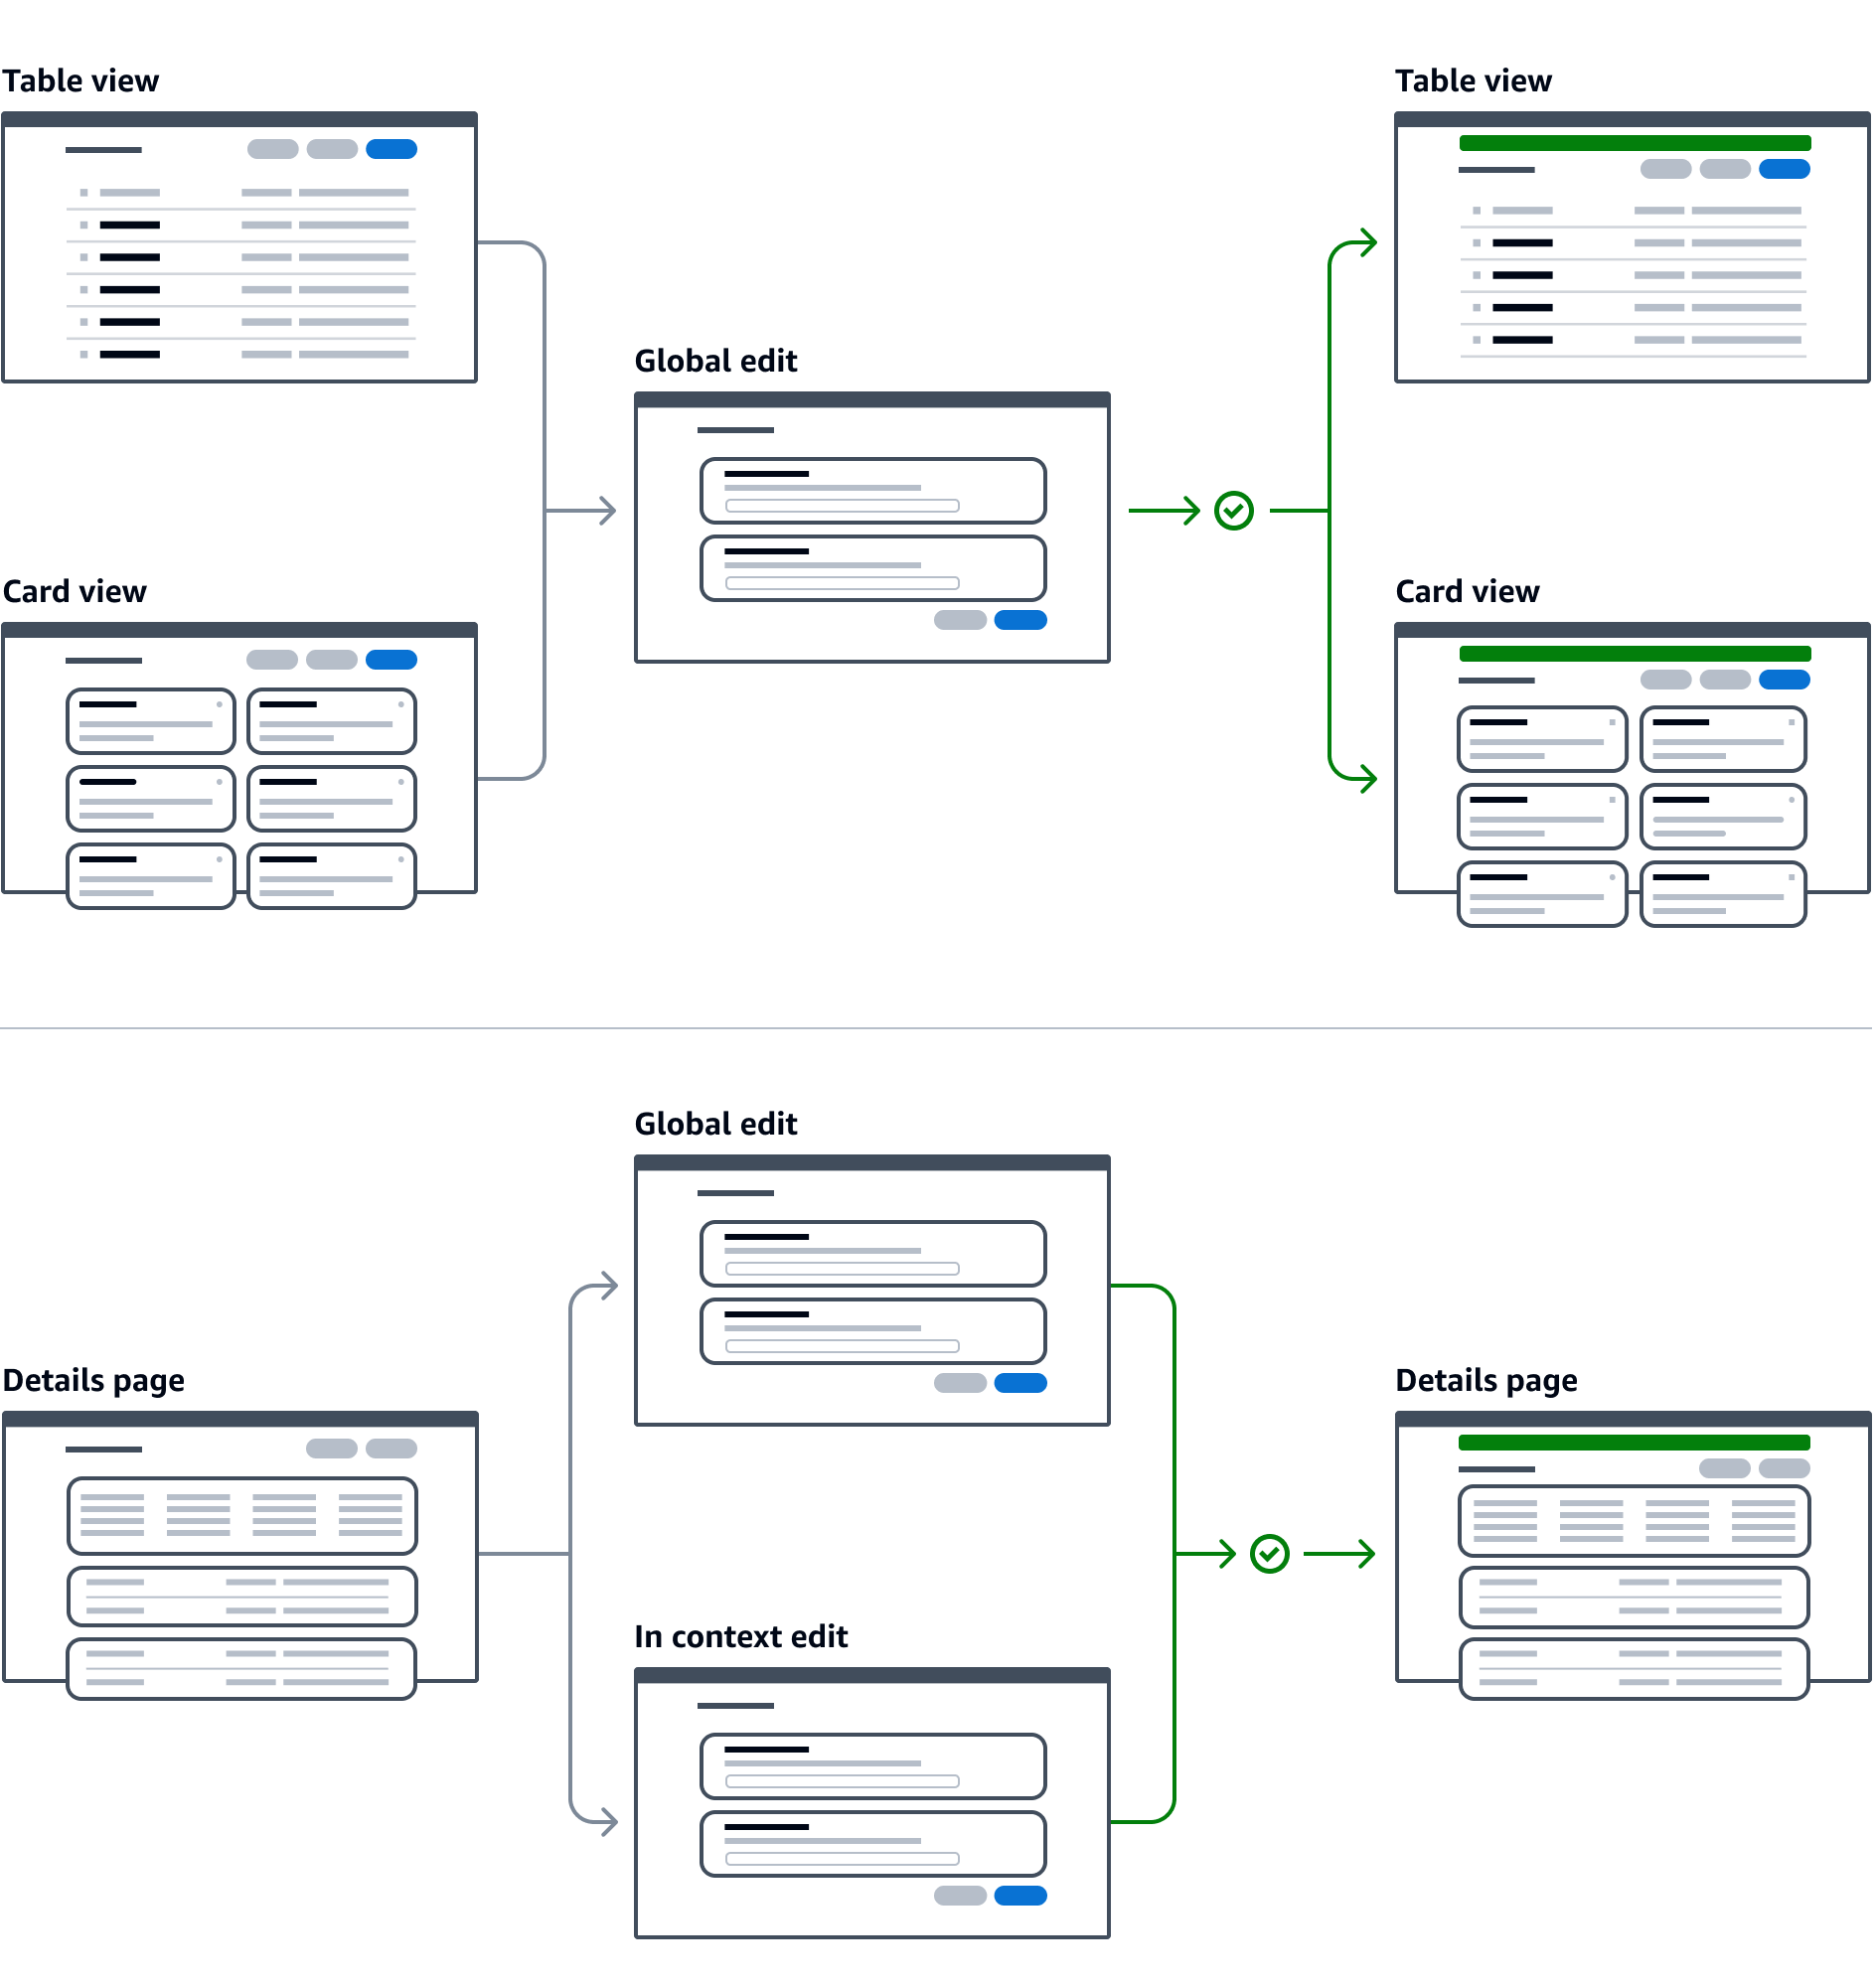 Workflow diagram showing a successful edit resource flow from table or card view to global edit and back to table or card view.